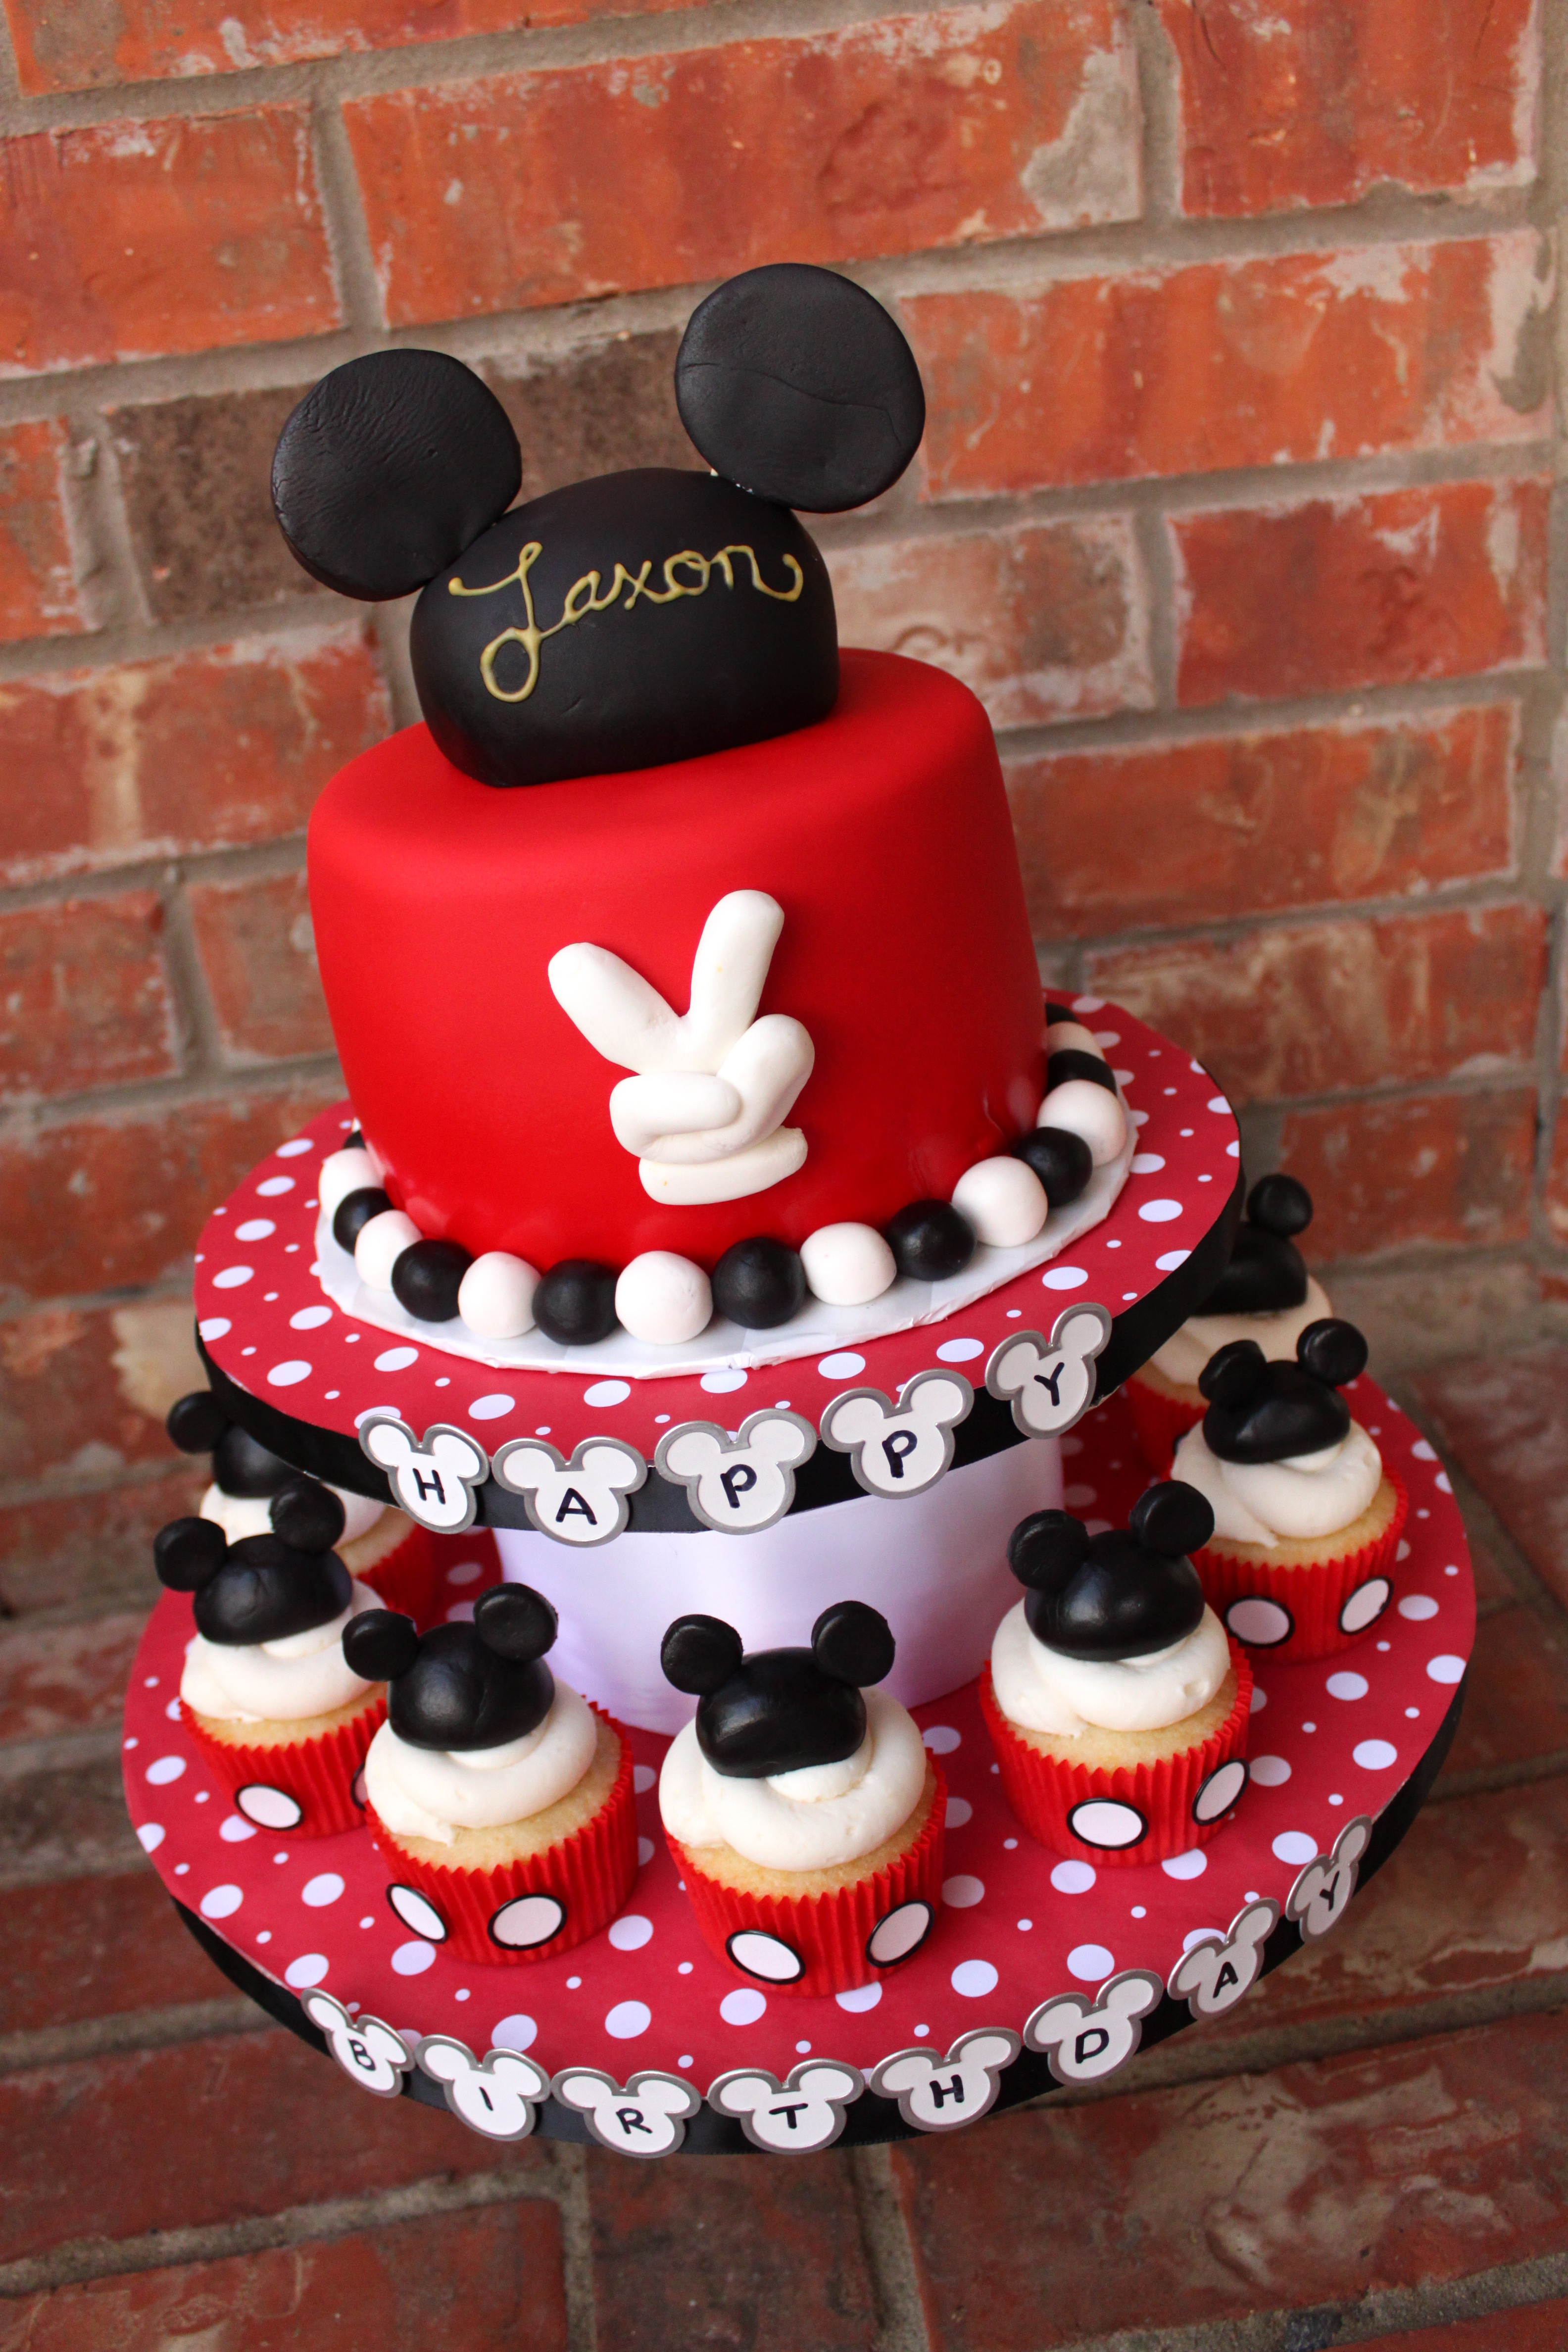 How To Decorate Mickey Mouse Cake Pan | Decoratingspecial.com